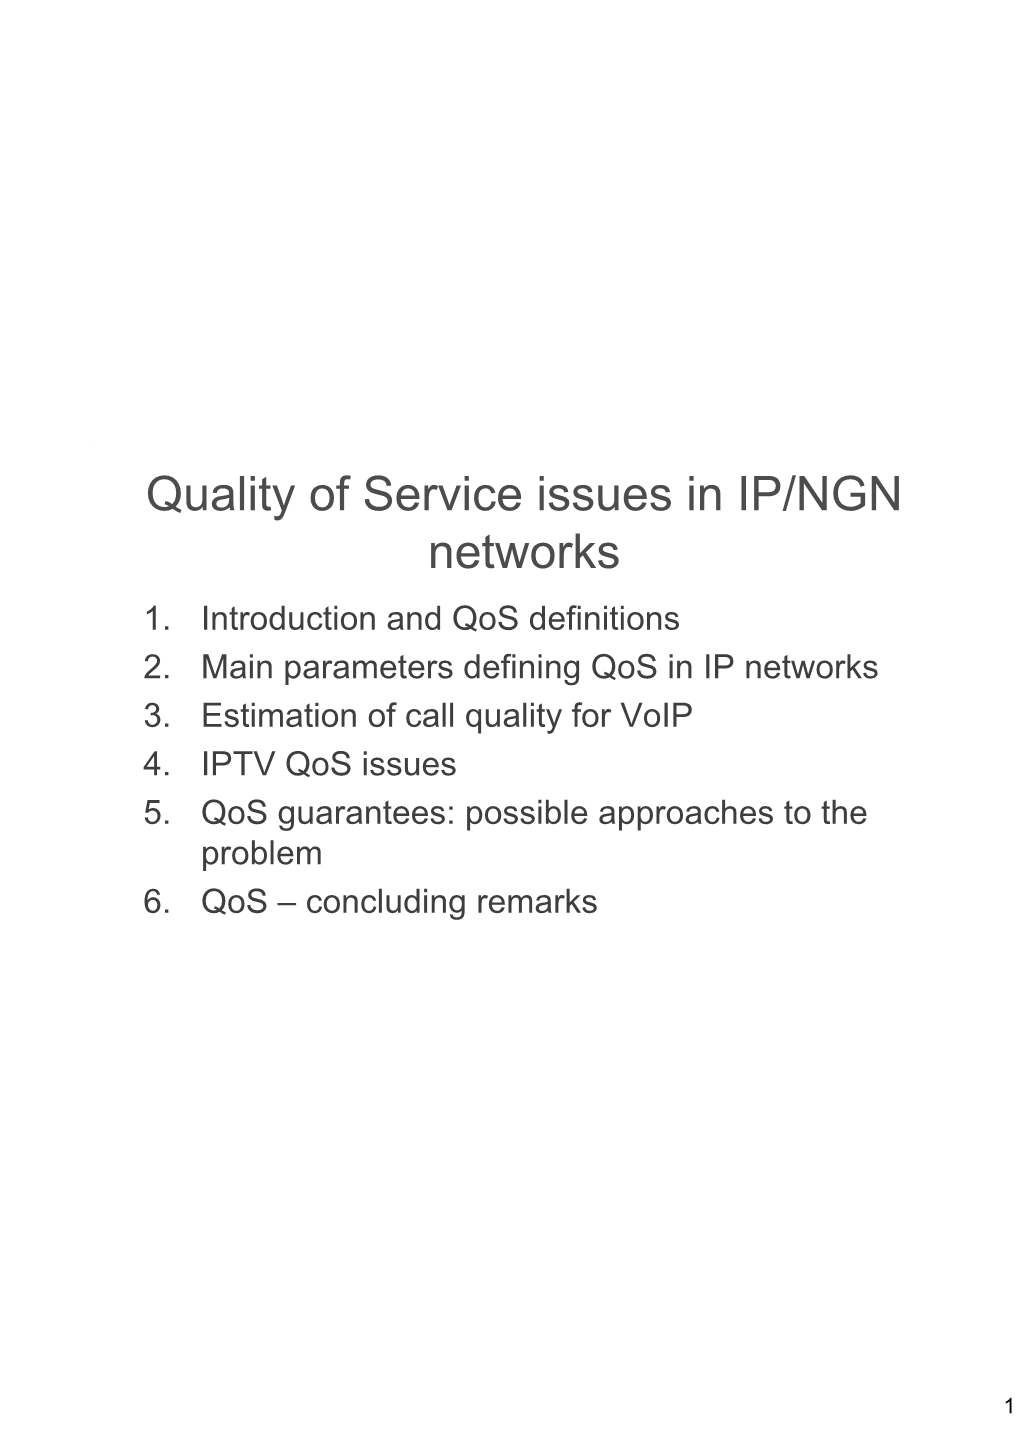 Quality of Service Issues in IP/NGN Networks 1